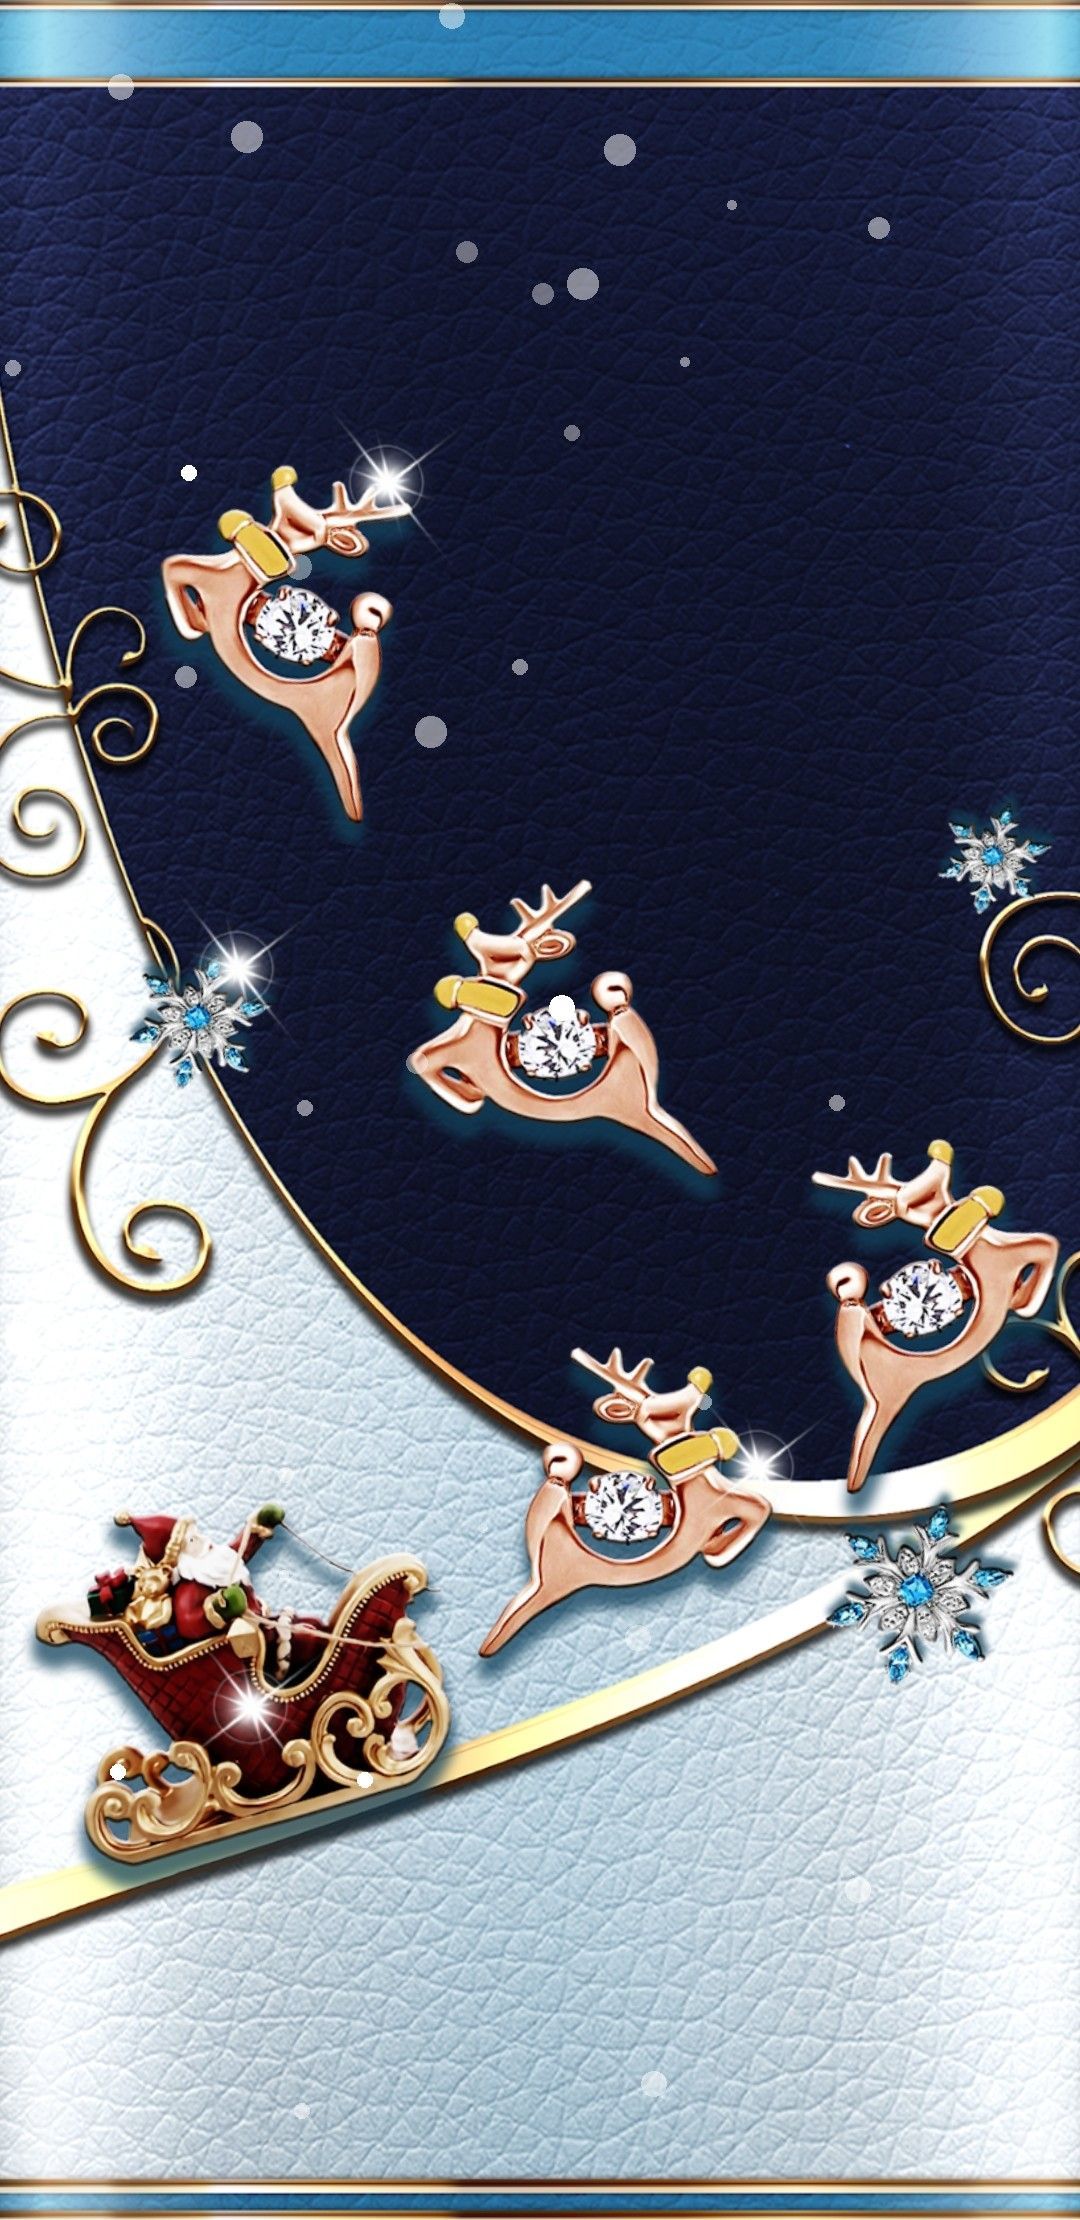 Wallpaper. By Artist Unknown. Bling wallpaper, Christmas wallpaper, Christmas background